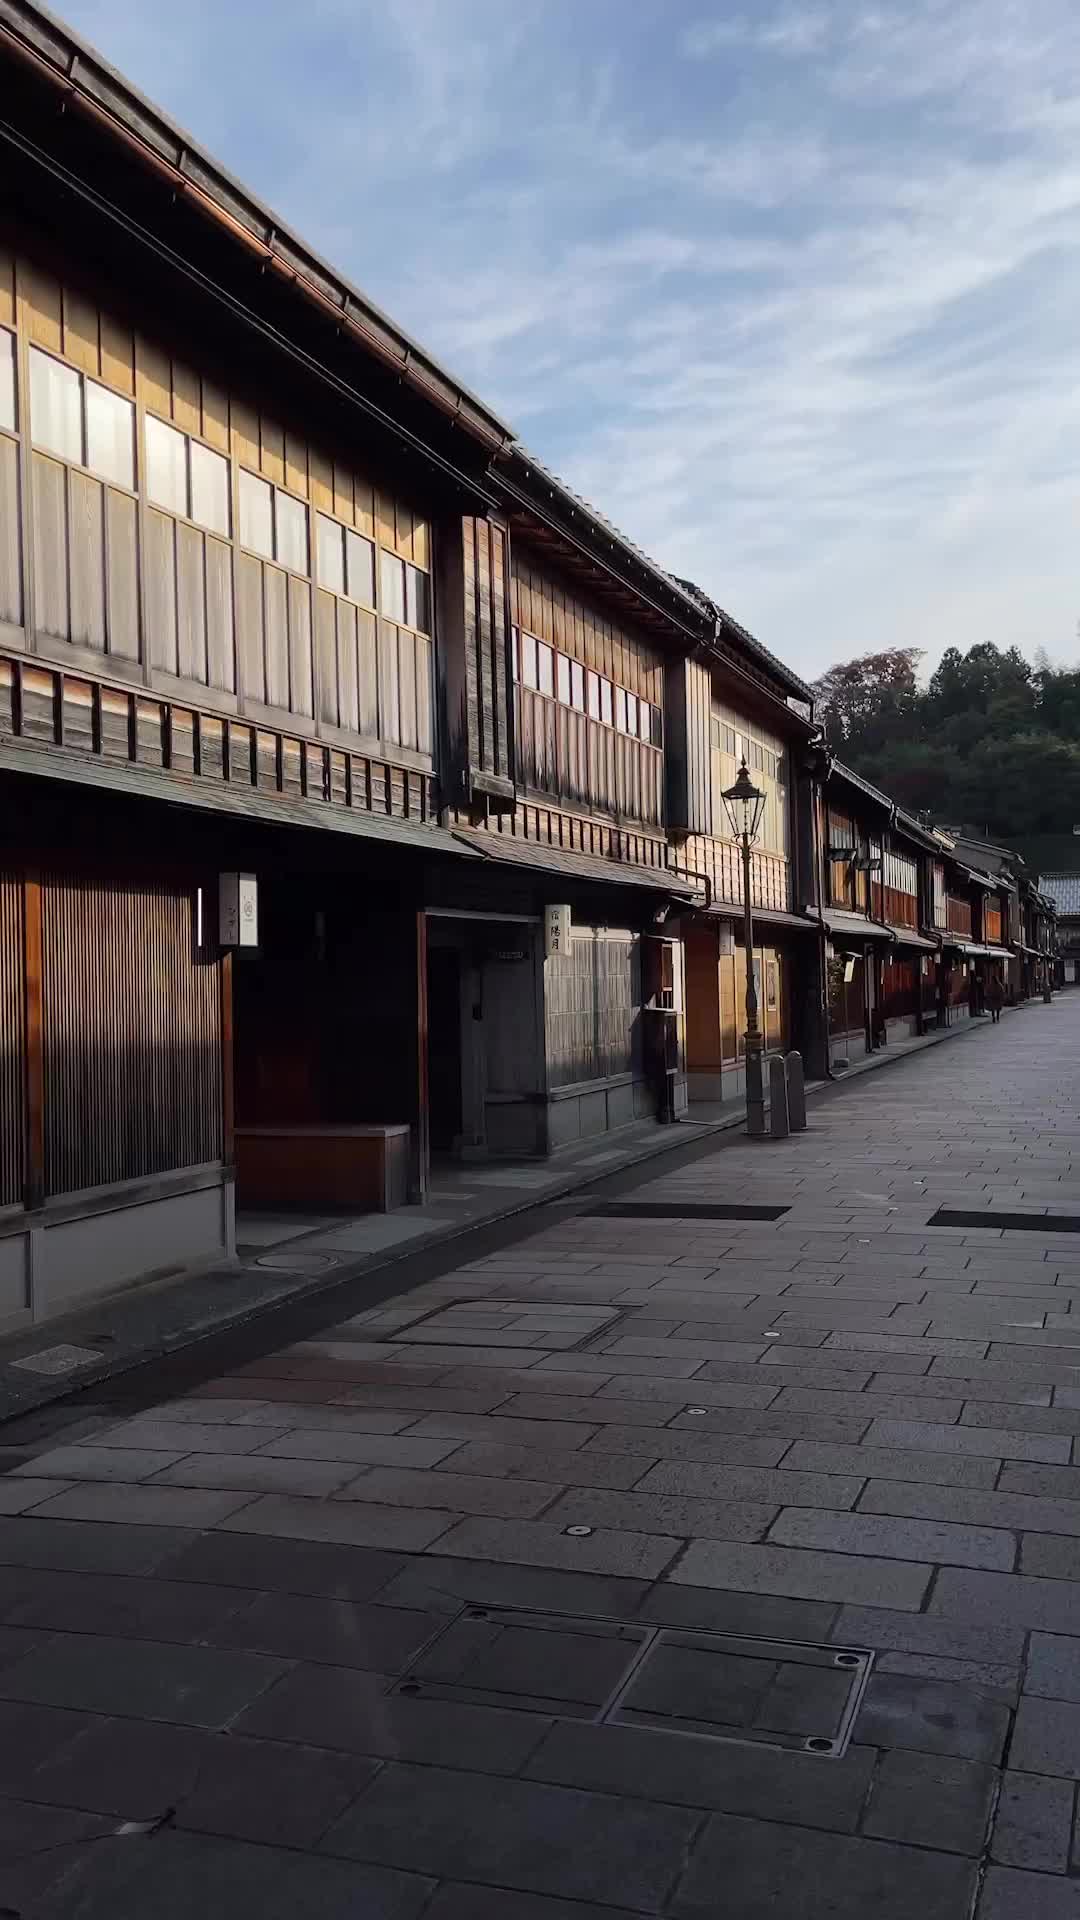 Here are 5 experiences to add to your next trip to Japan’s craft capital, Kanazawa 🇯🇵

1. Explore Edo Period Architecture in the Historic Higashi Chaya District.
 
2. Experience True Omotenashi at a Geiko Teahouse.

3. Discover Seafood Delicacies at Omicho Market.

4. Step Back in Time at the Nagamachi Samurai District.
 
5. Immerse Yourself in the Colours of Kenrokuen Garden. 

Have you visited Kanazawa? Let me know in the comments!
🔖 Save this post for your next trip to Japan 🇯🇵

#travel #reelsininstagram #travelguide #beautifuldestinations #visitjapan #visitjapanuk #japan #kanazawa